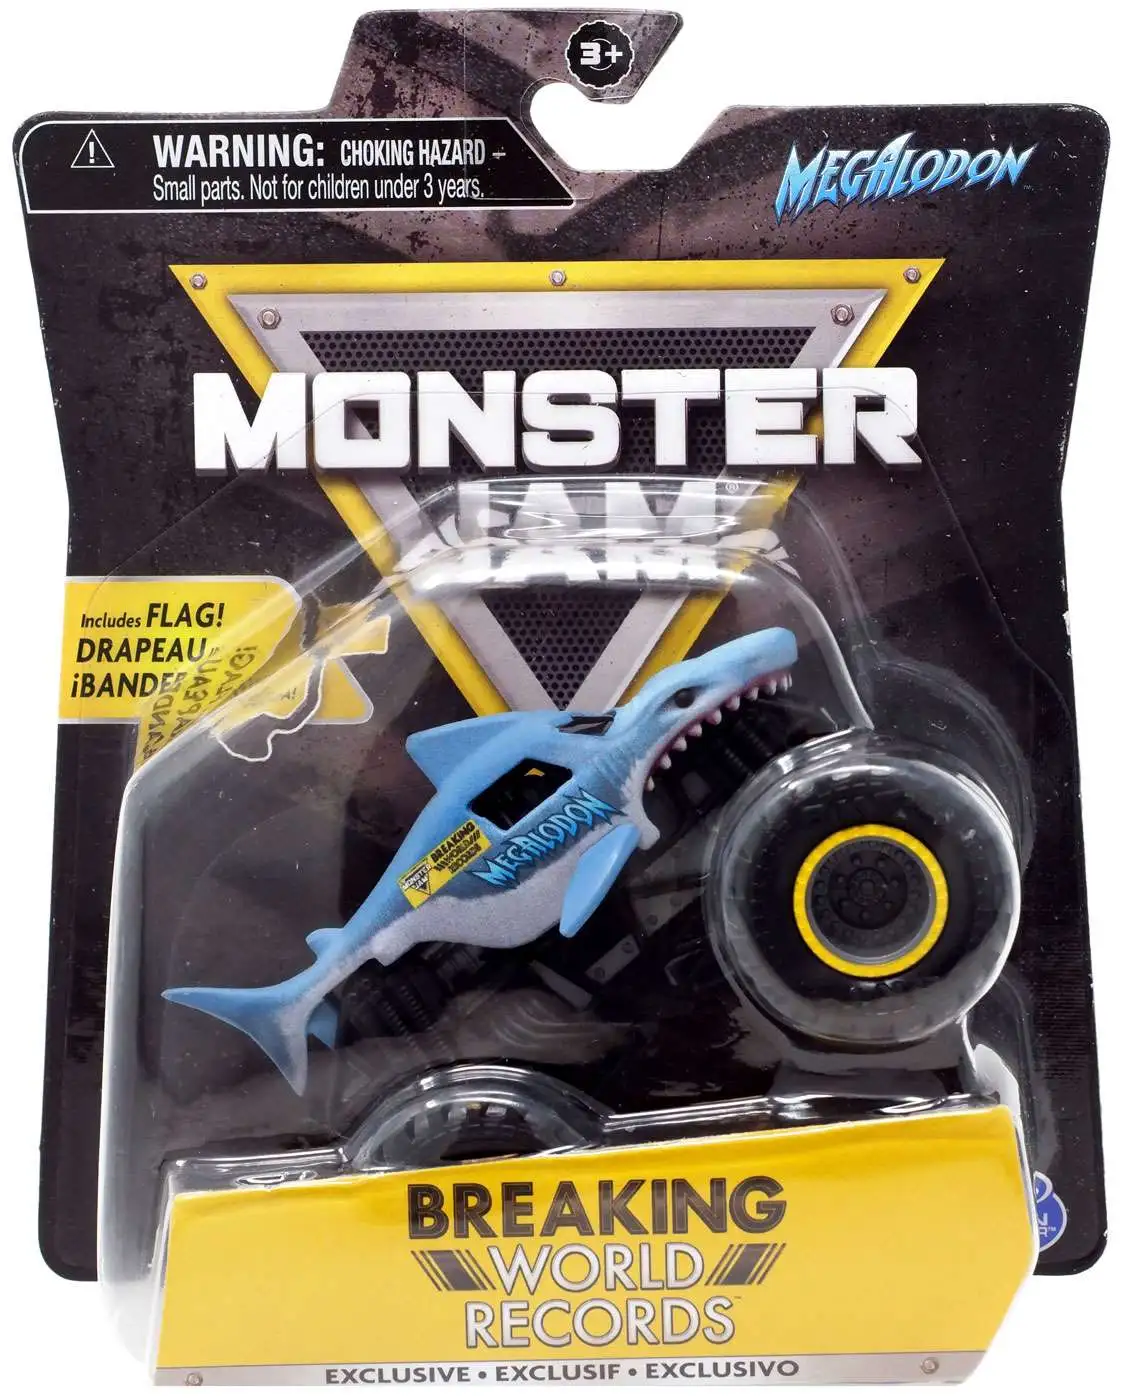 Year 2021 Monster Jam 1:24 Scale Die Cast Official Truck - Breaking World  Record MAX-D MAXIMUM DESTRUCTION with Monster Tires and Working Suspension